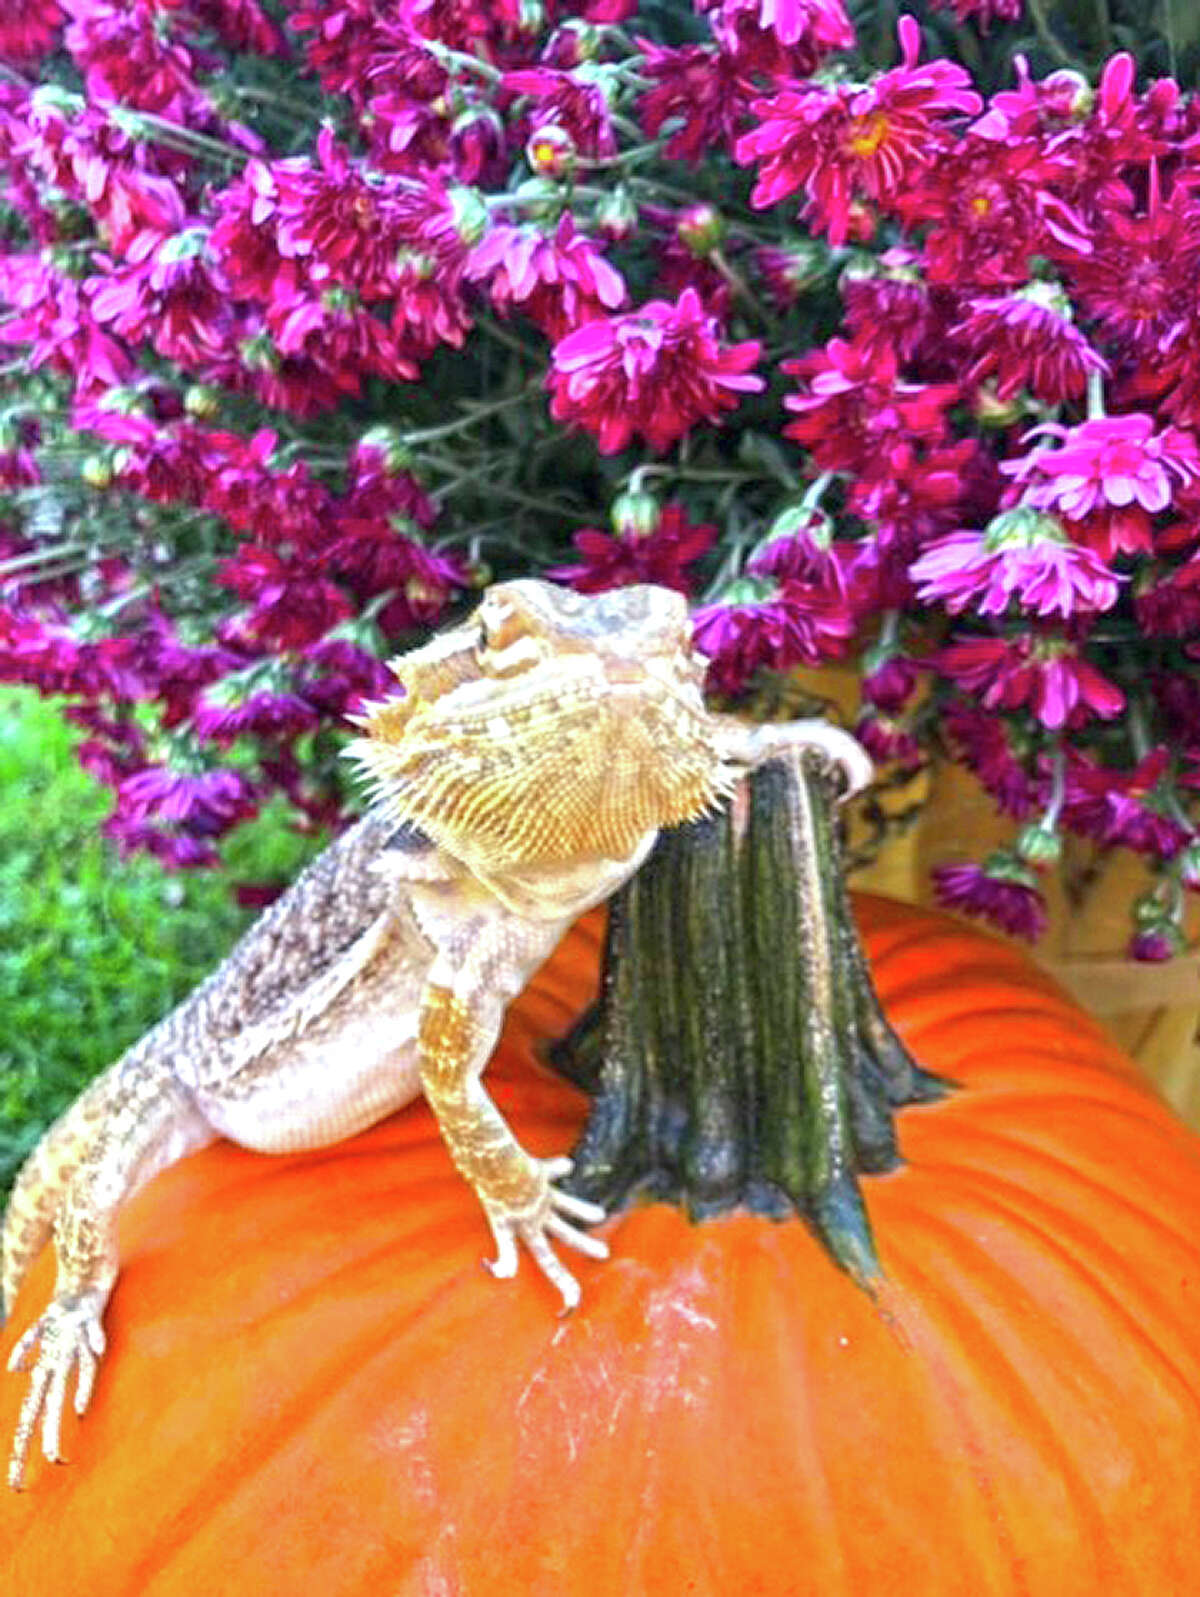 A bearded dragon takes ownership of a pumpkin in a Pleasant Plains yard.